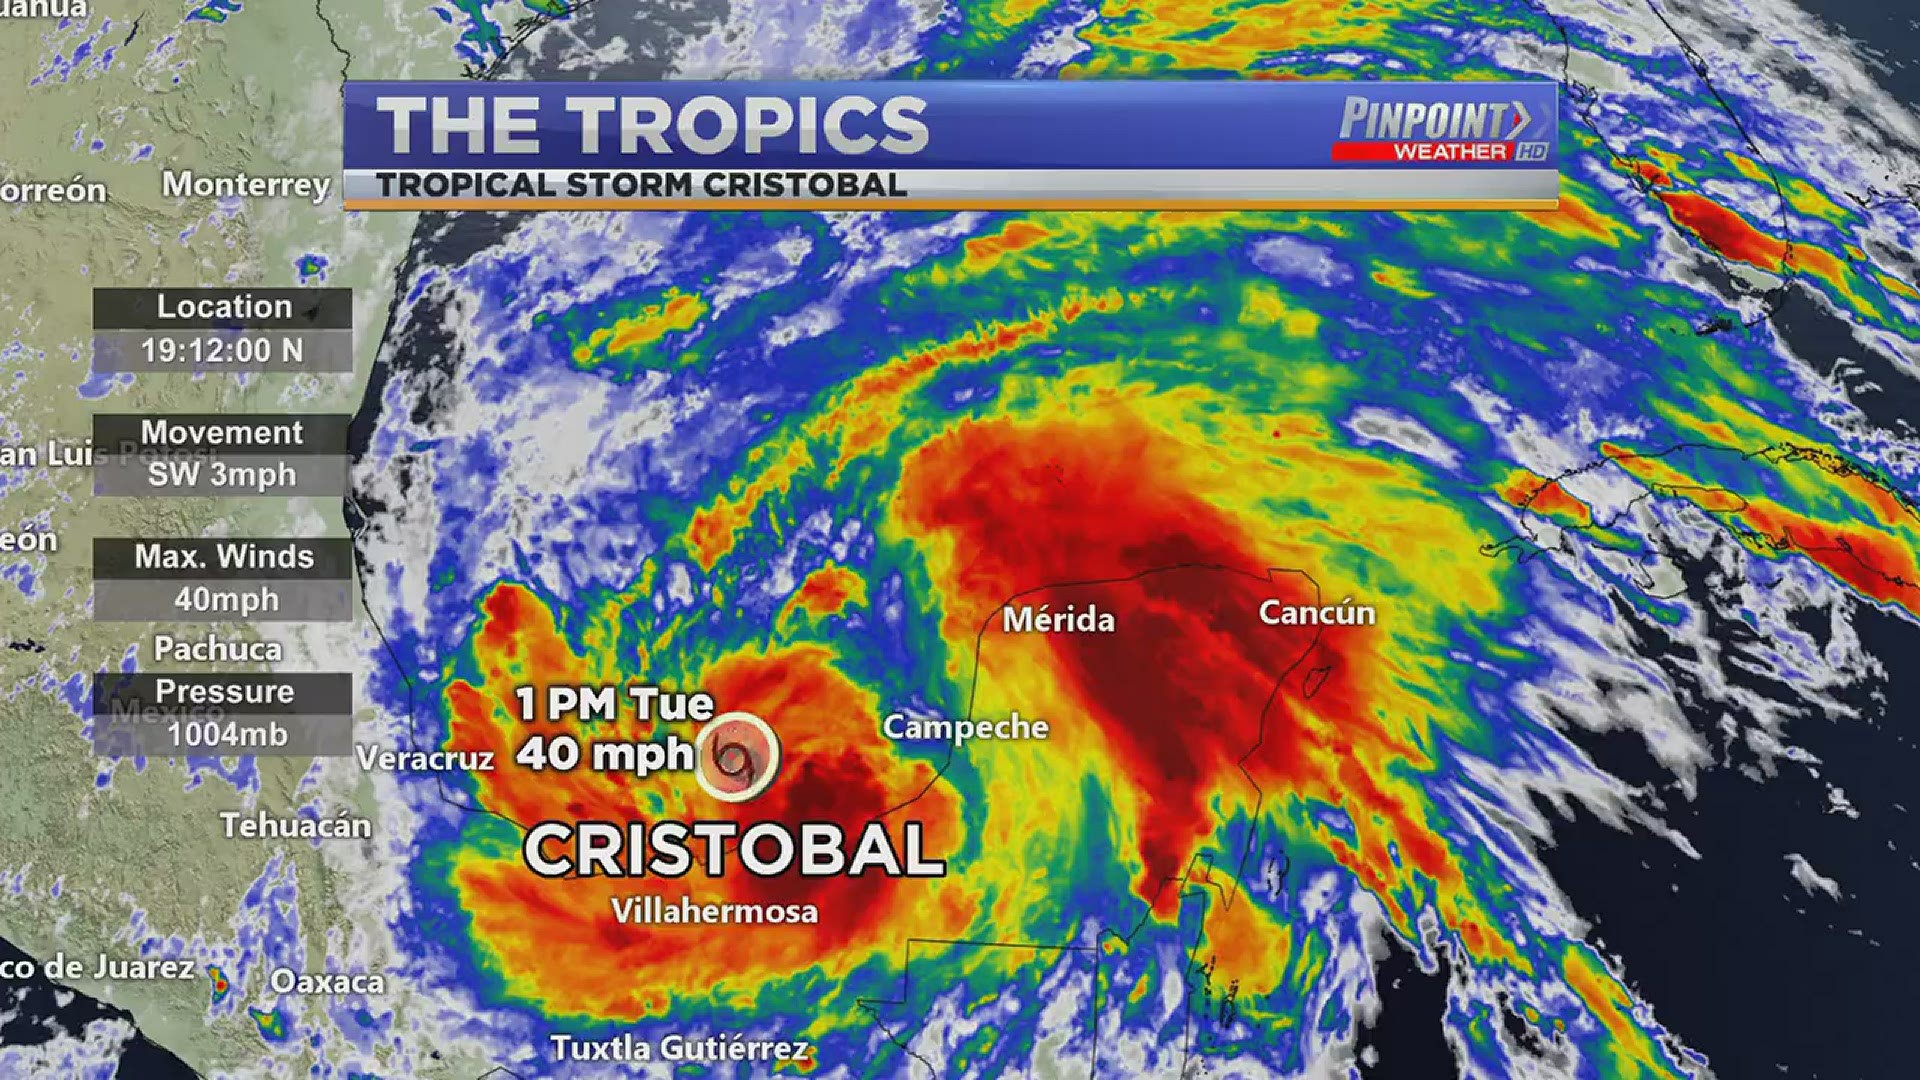 Cristobal will move very slowly over the next few days